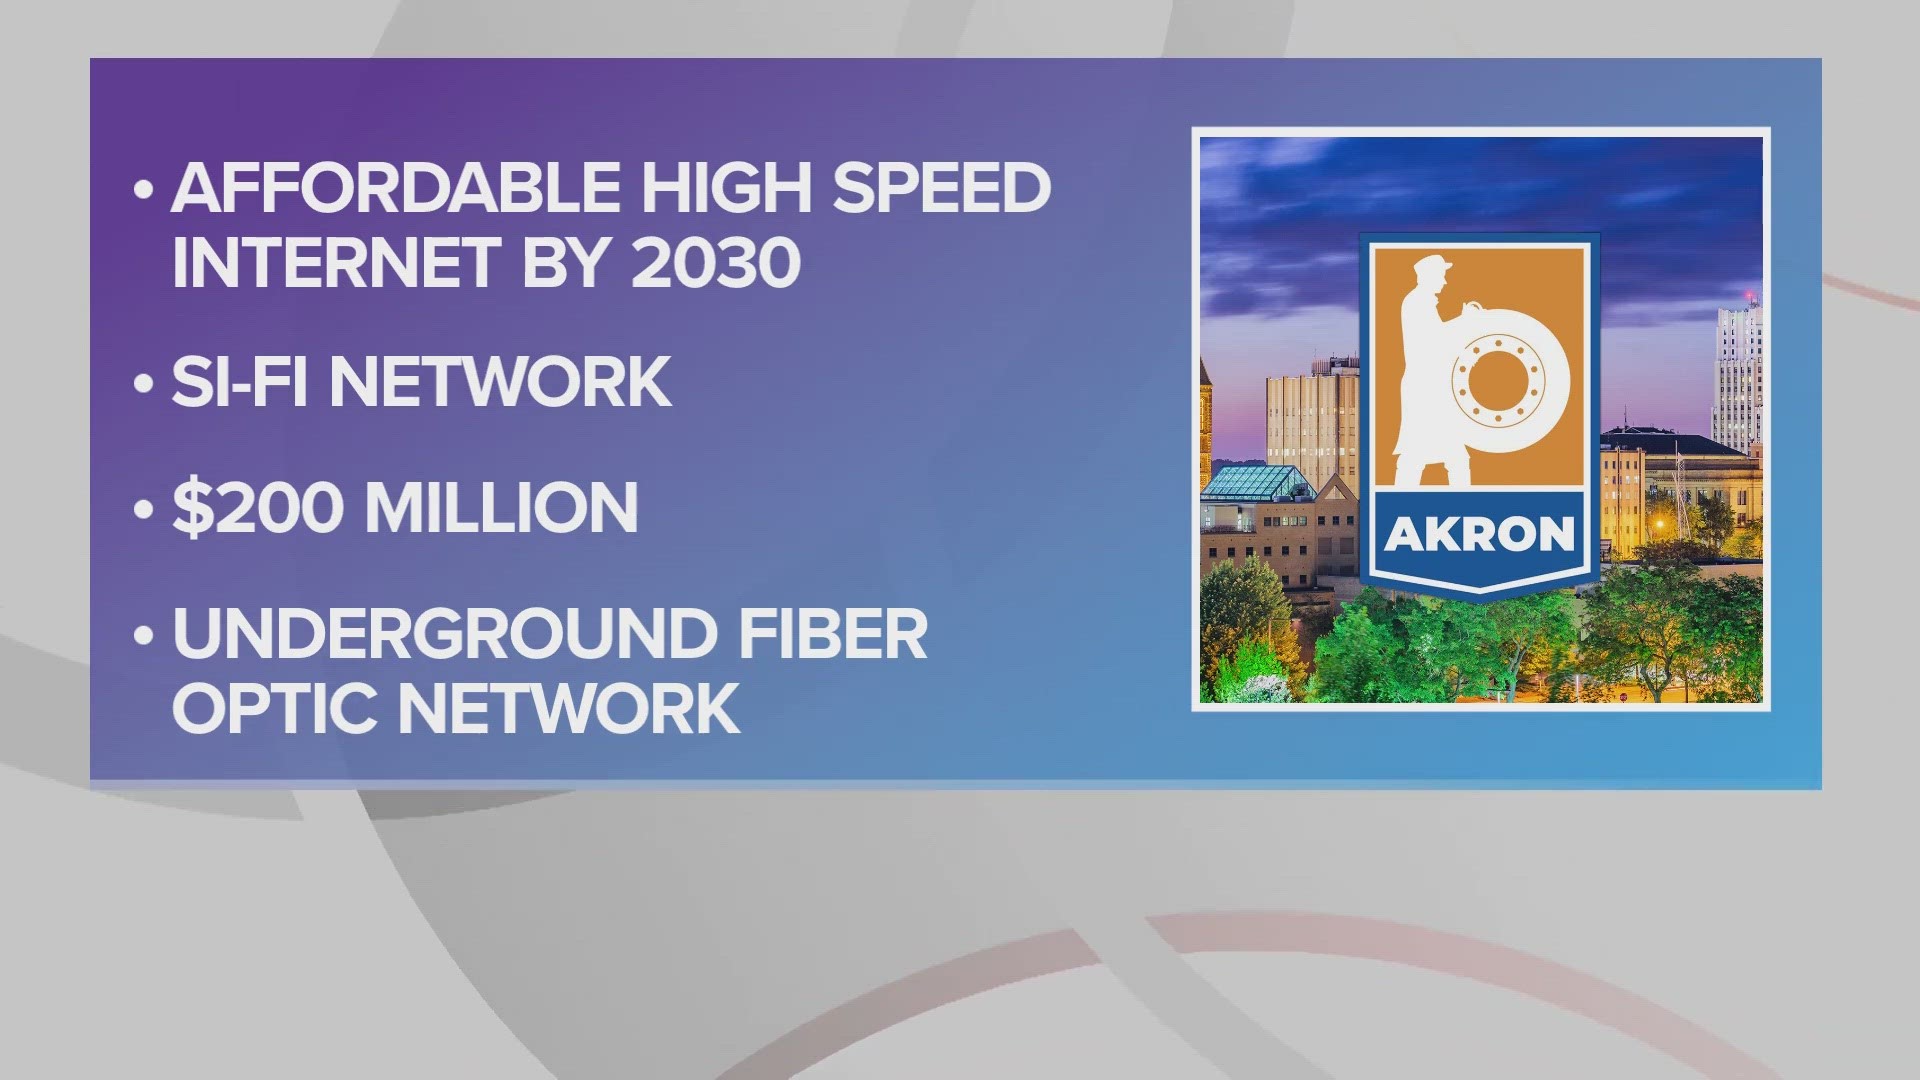 The city of Akron has partnered with SiFi Networks to bring affordable, high speed internet to every resident in the city by the end of the decade.